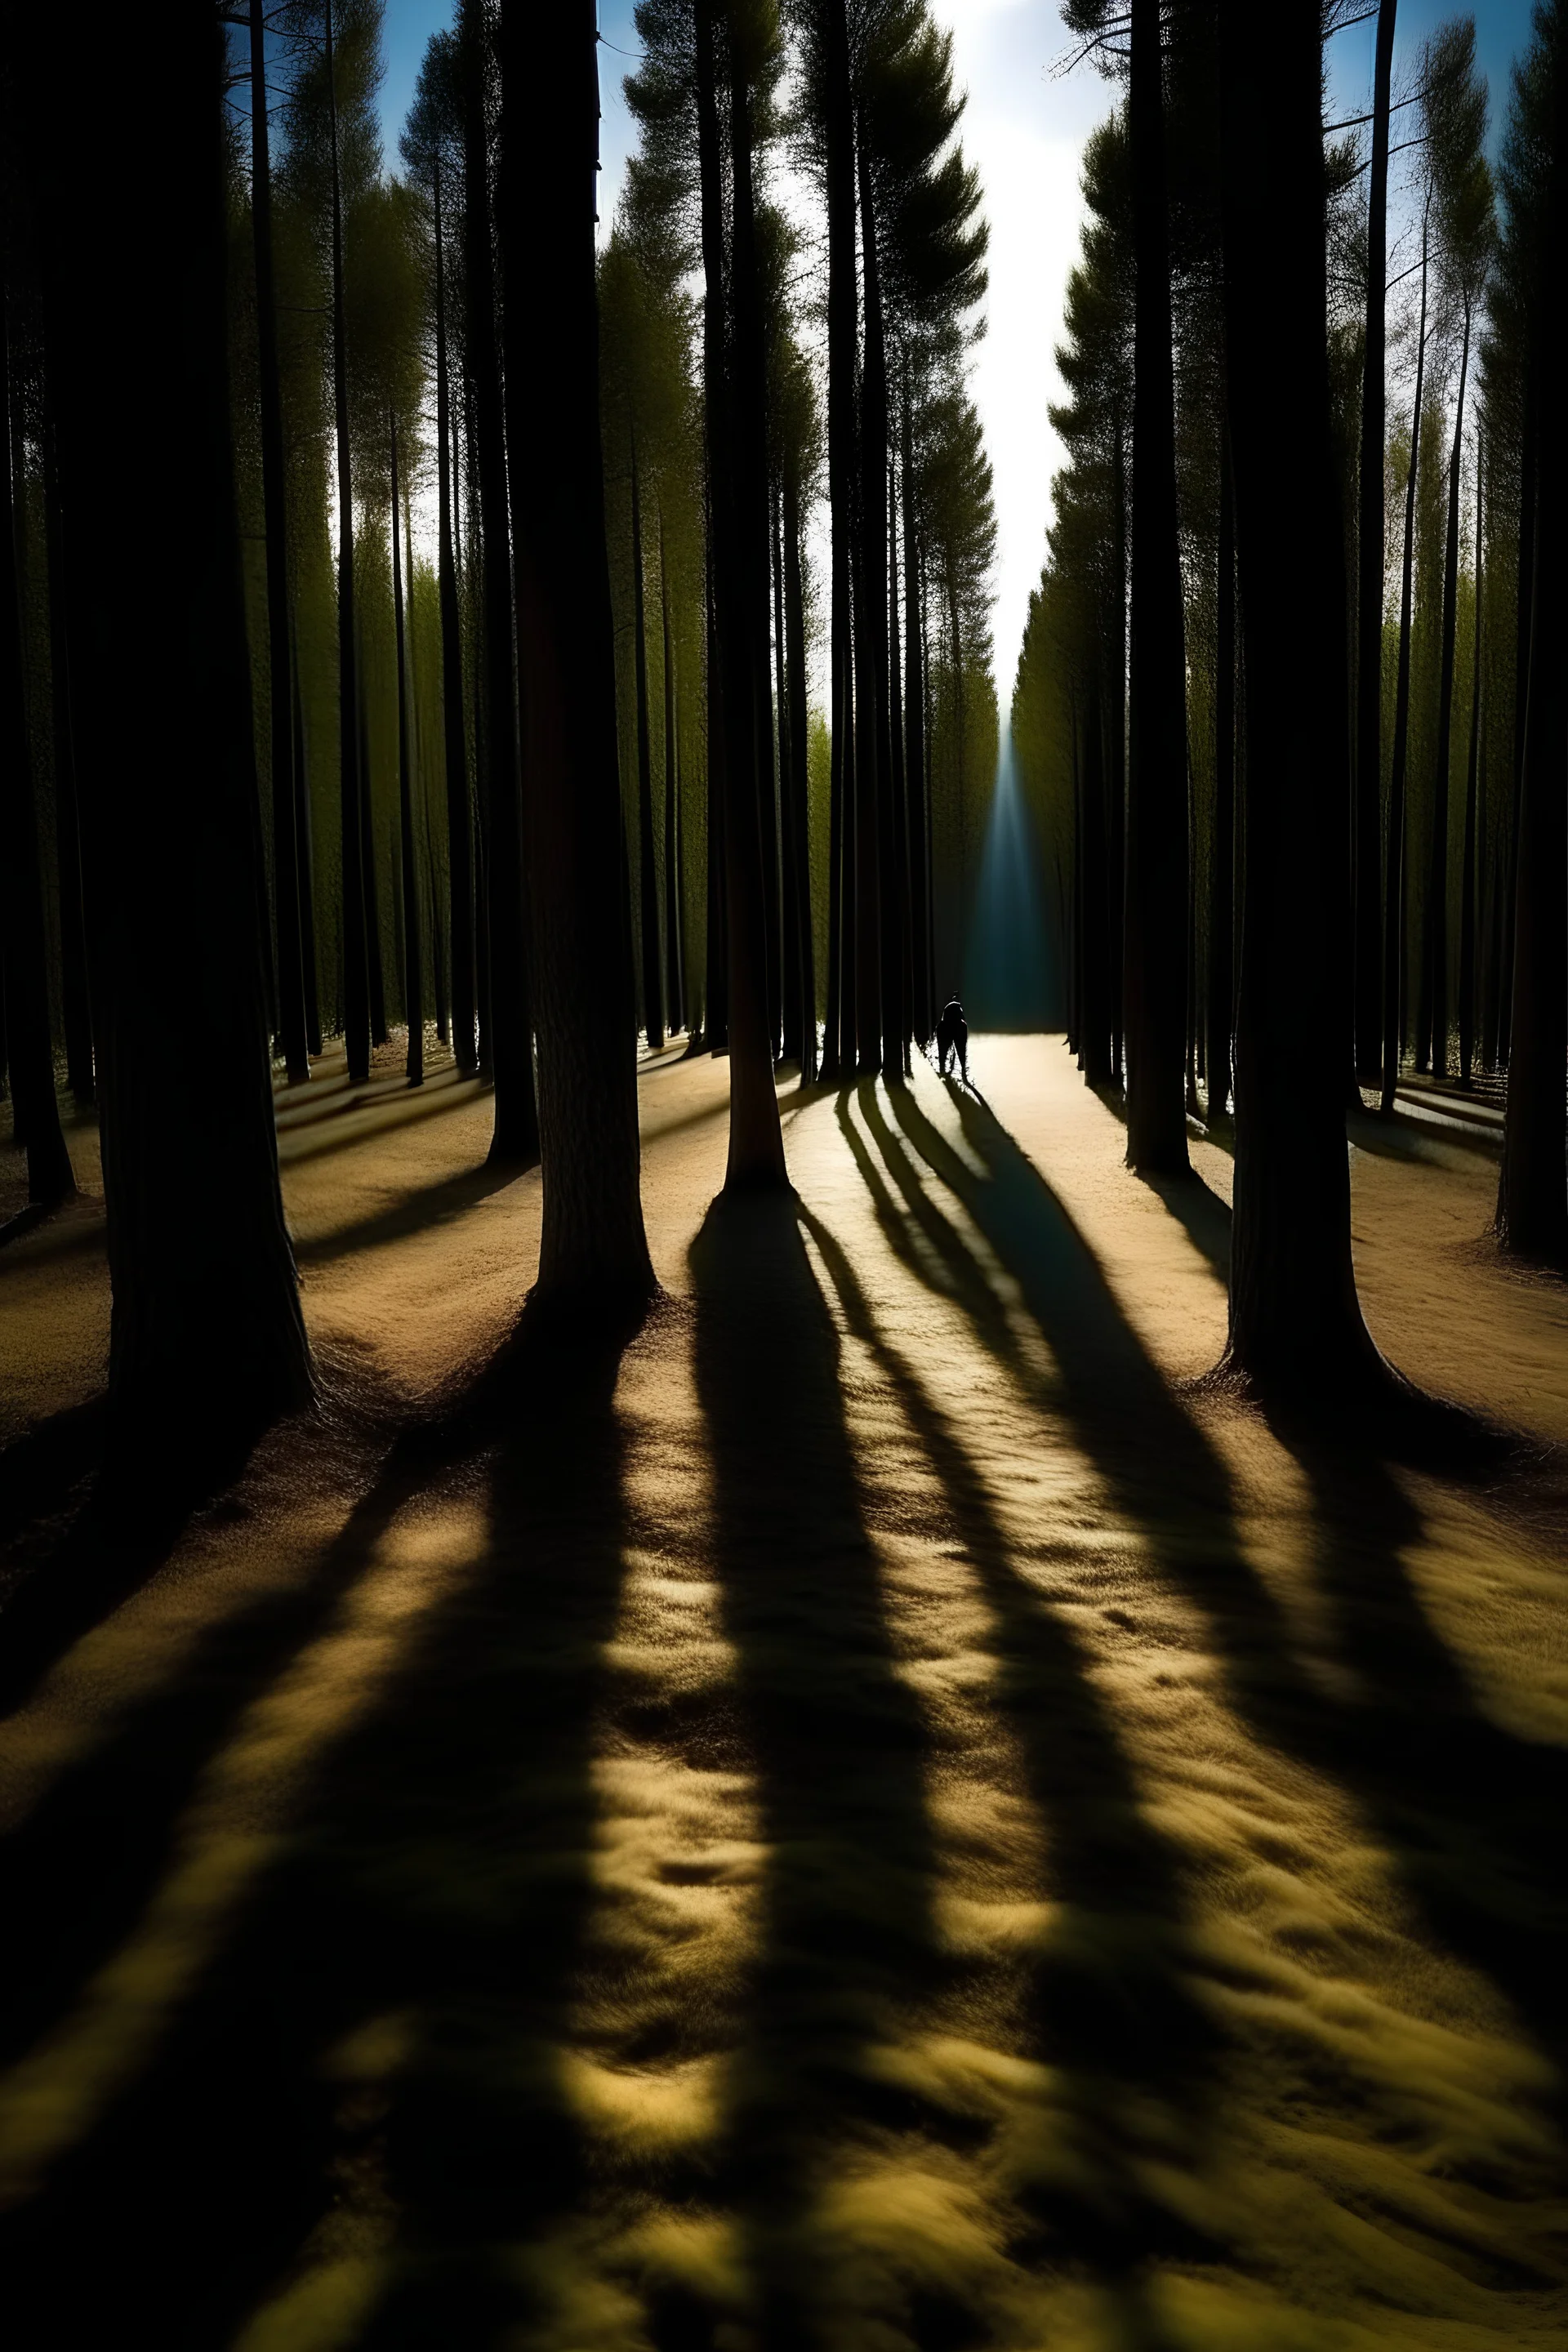 Shadows appeared at the corners of the roads in the forest and approached someone